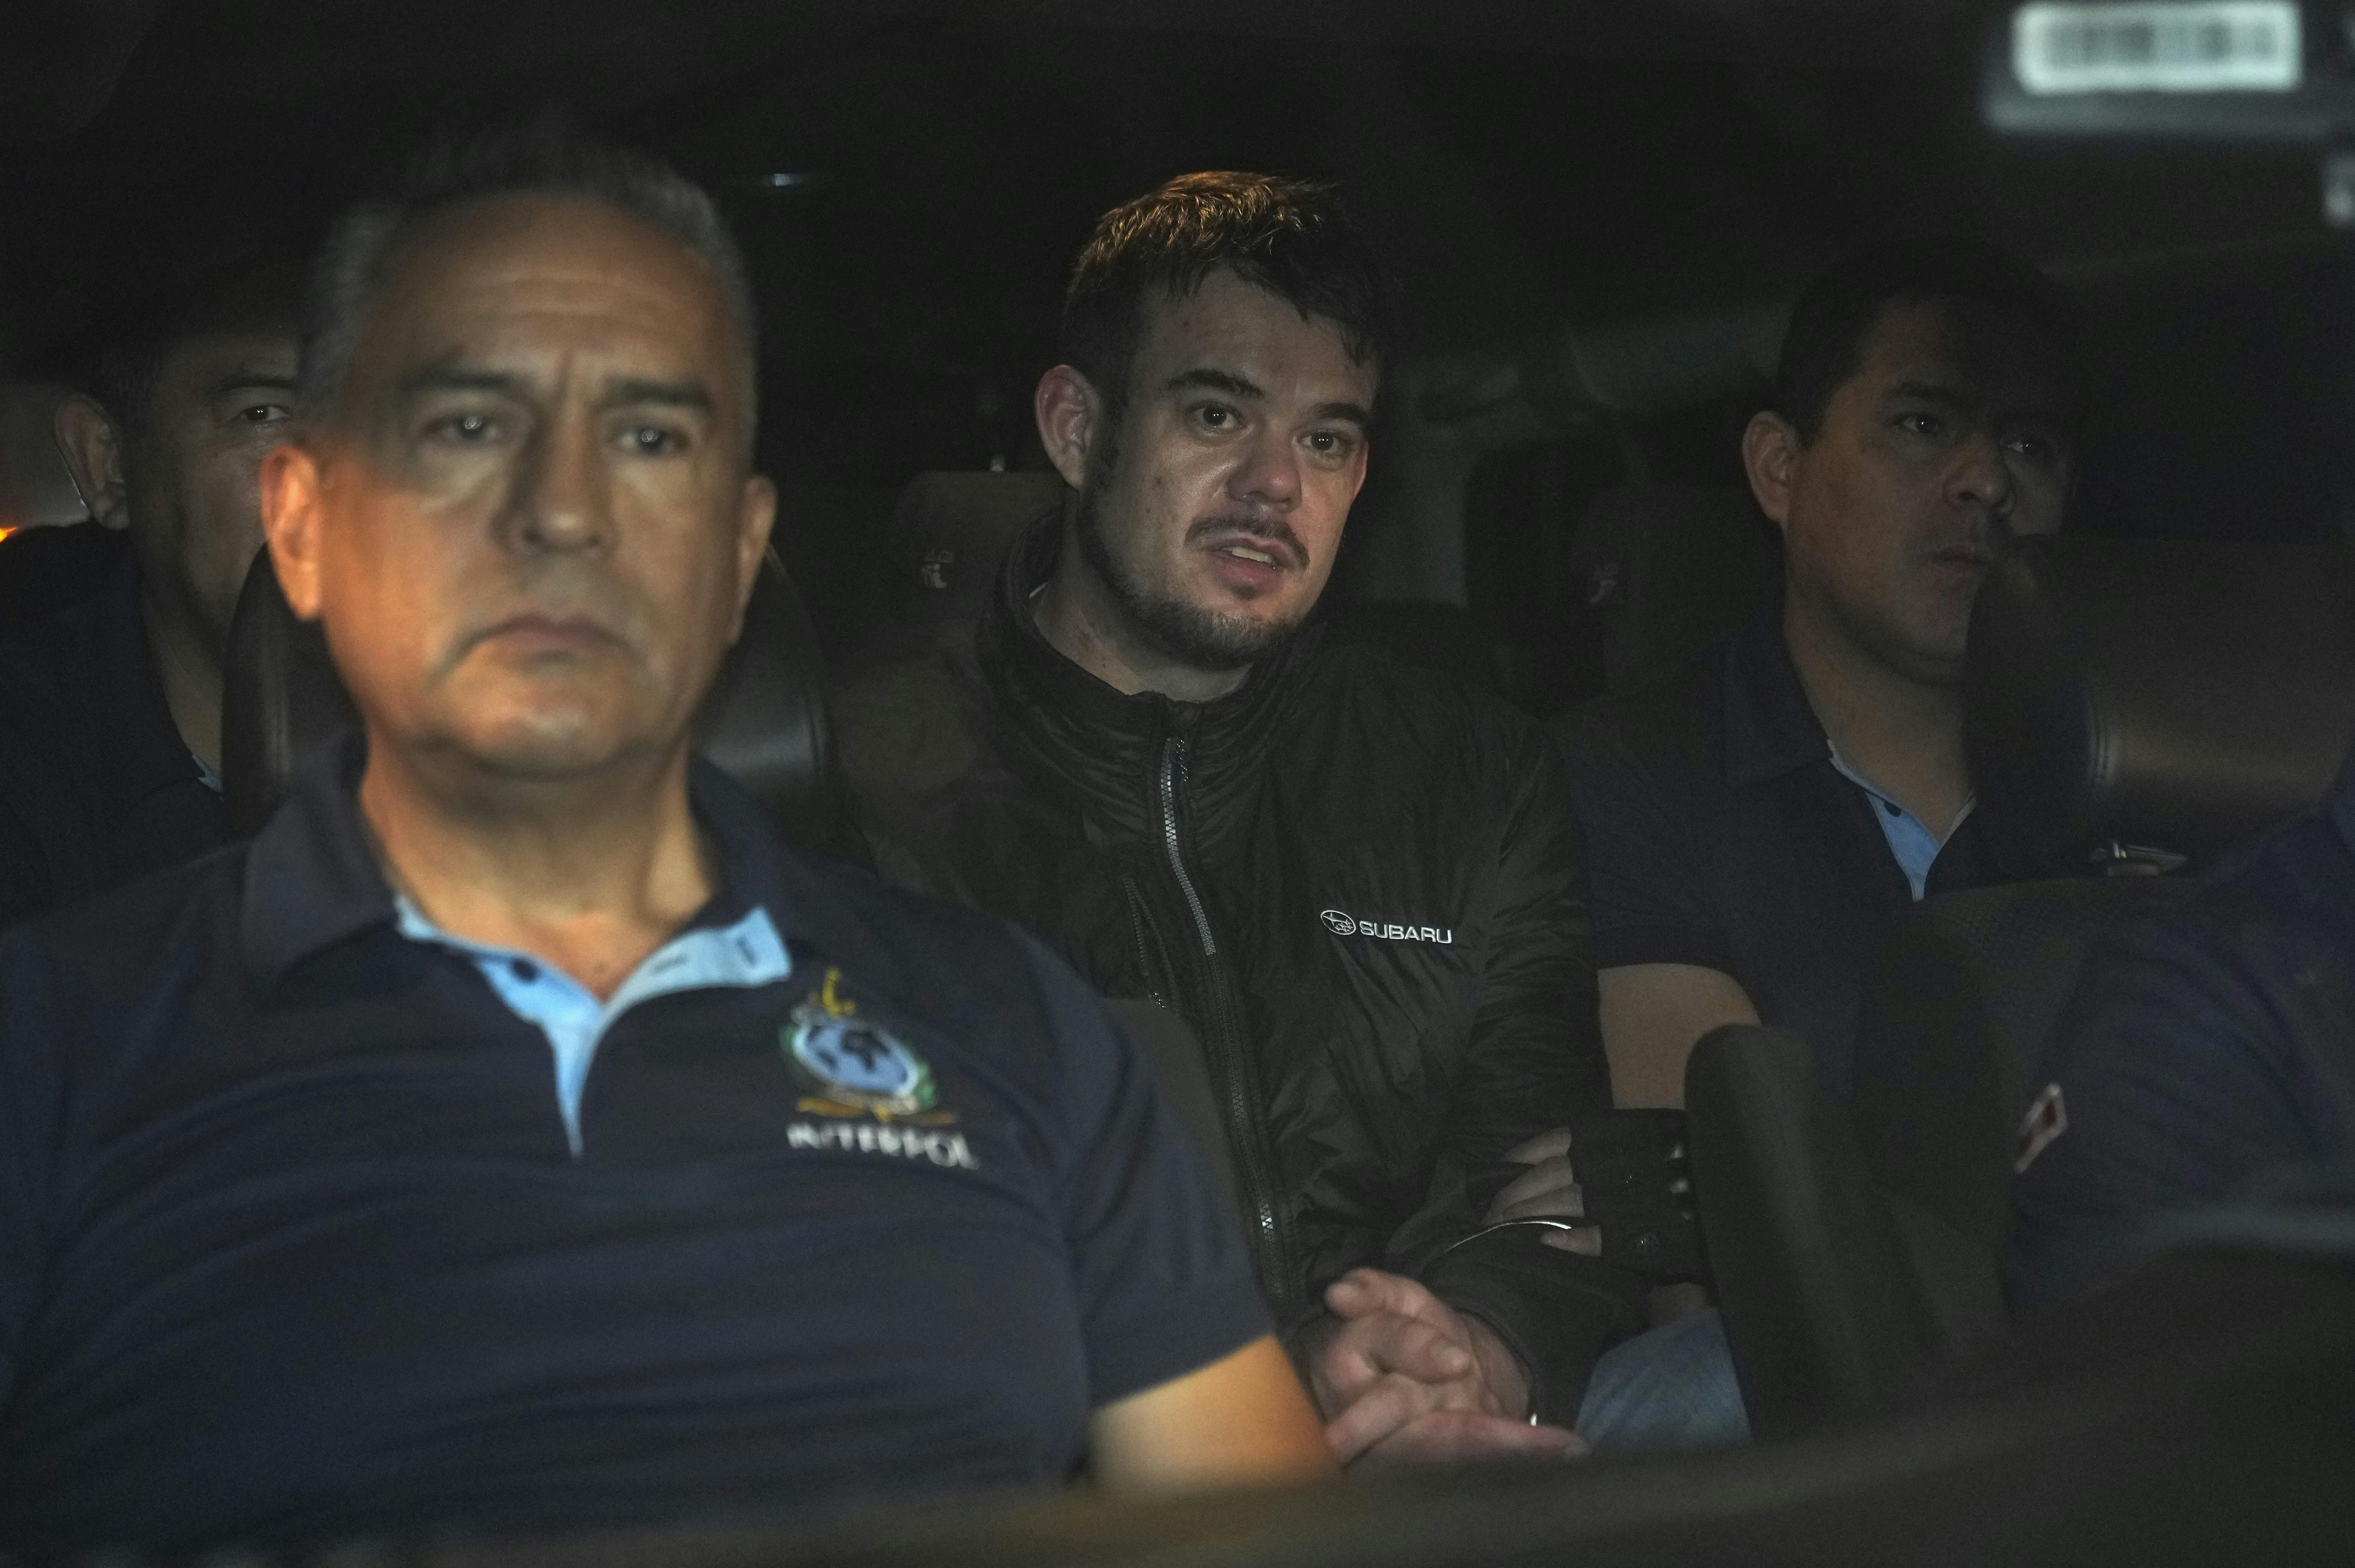 Dutch citizen Joran van der Sloot, center, is driven in a police vehicle from the Ancon I maximum-security prison, outskirts of Lima, Peru, early Thursday, June 8, 2023. The main suspect in the unsolved 2005 disappearance of American student Natalee Holloway on the Caribbean island of Aruba is expected to be extradited Thursday from Peru to the United States. (AP Photo/Martin Mejia)